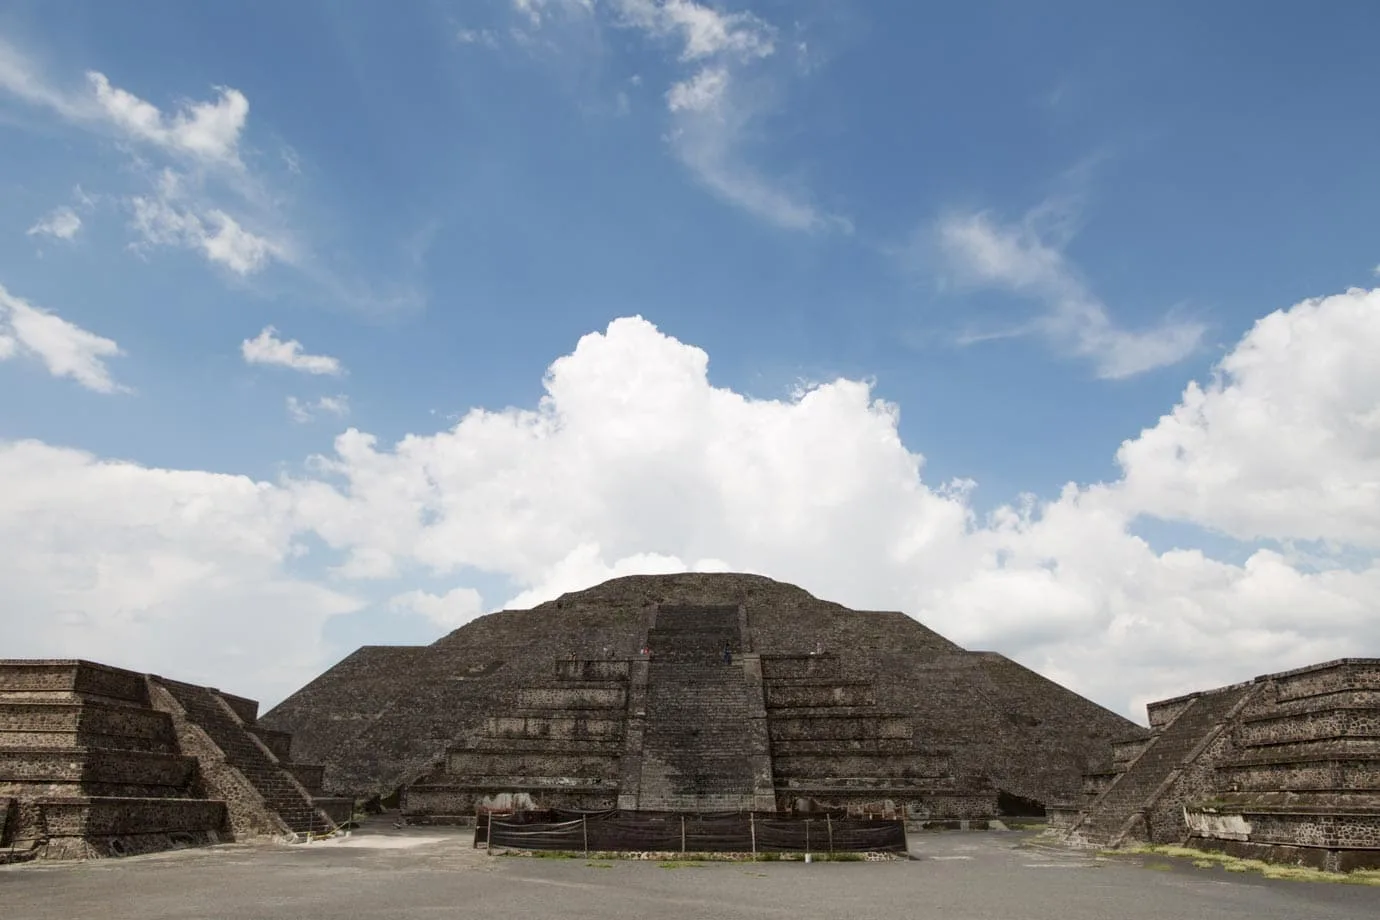 The Pyramid of the Moon at Teotihuacan